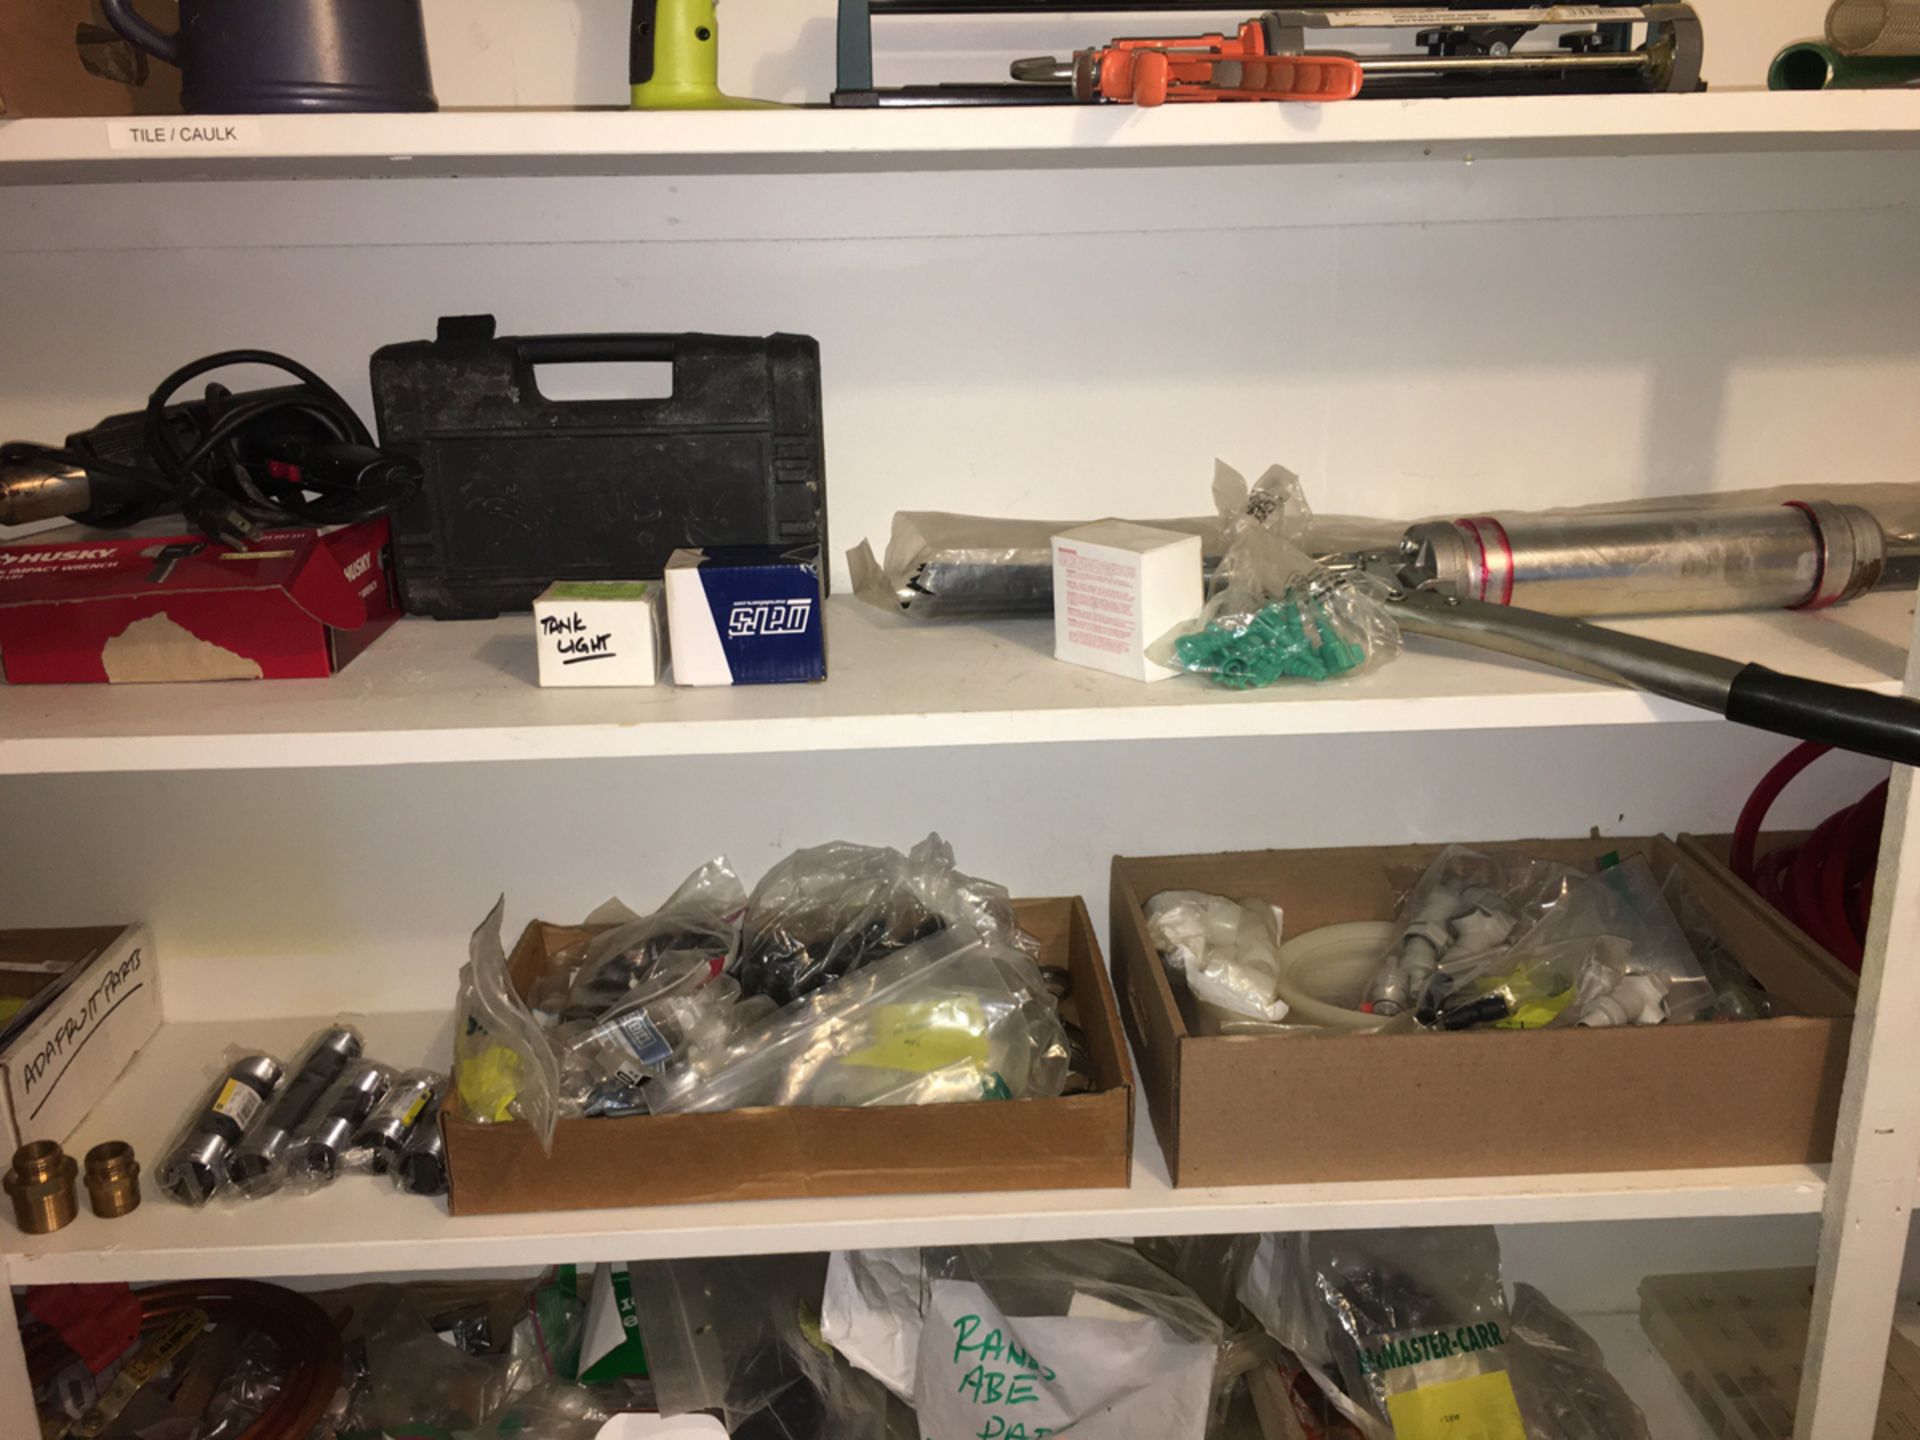 Contents Of Parts And Spares Room - Image 11 of 16